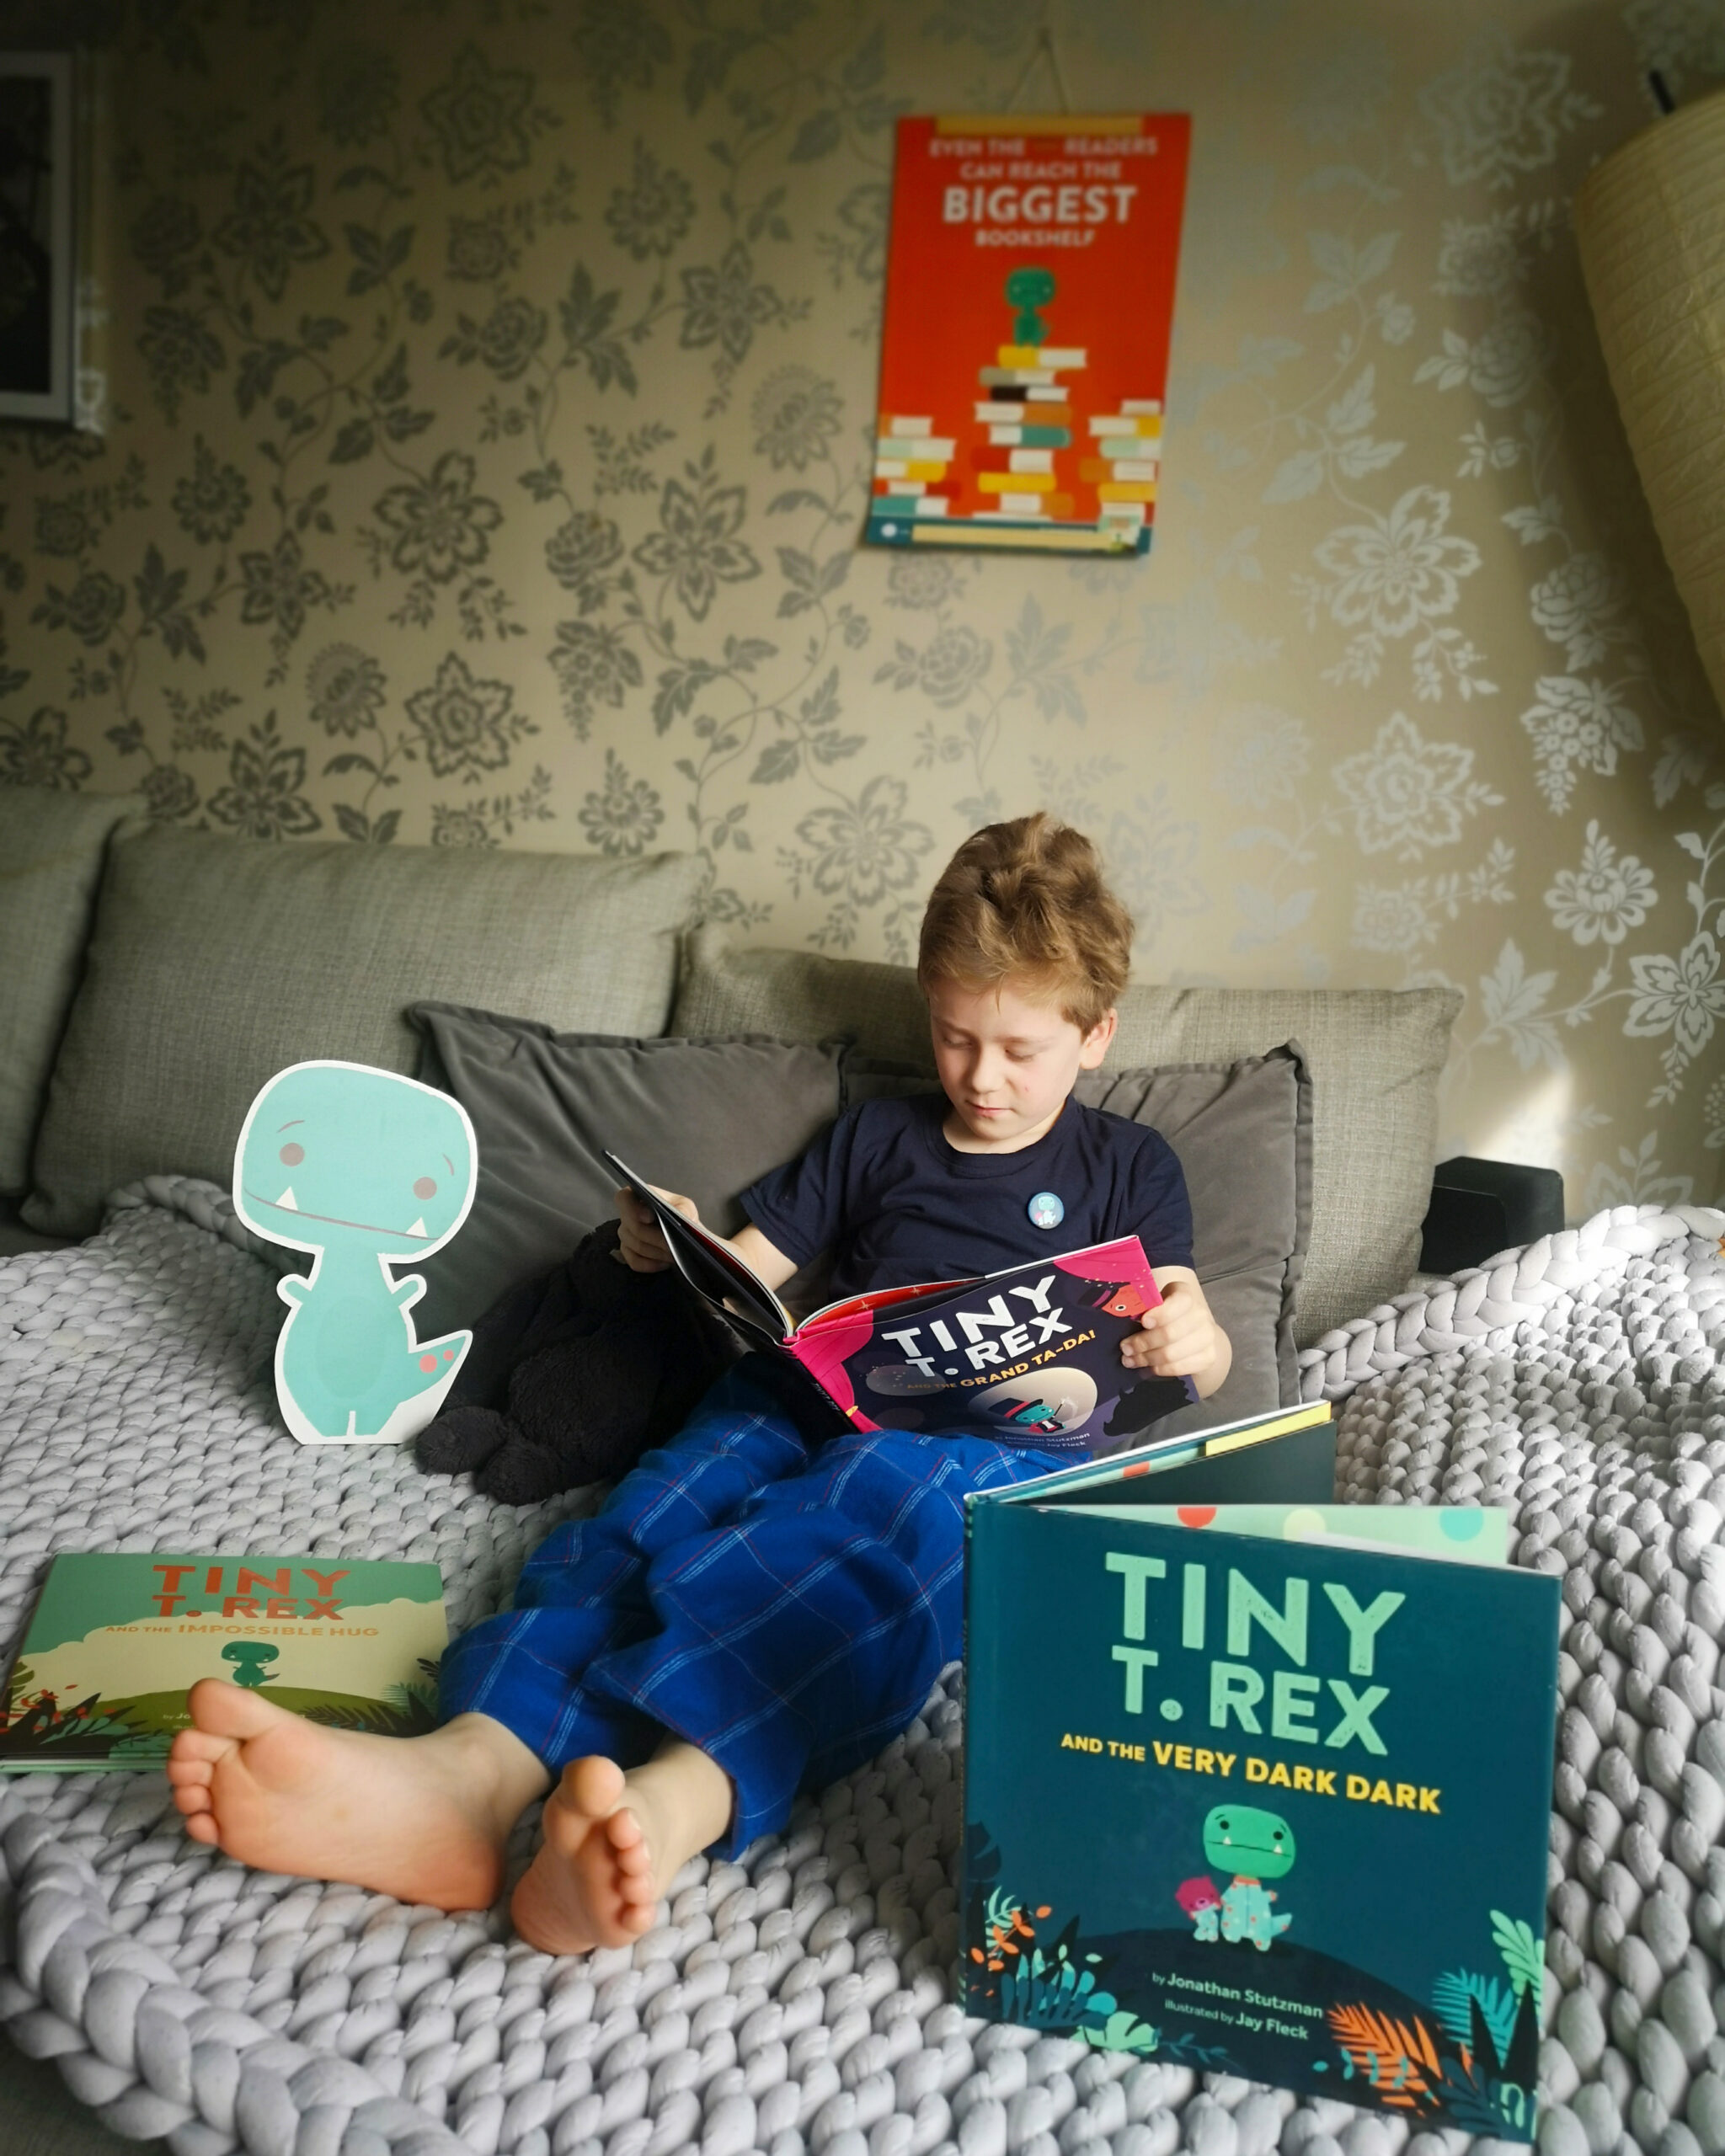  Tiny T. Rex Books Series, Abrams & Chronicle Books, Independent Publisher, Kids Books, Illustrations Books, Easter Giveaway, Competition, Win, Picture Book, the Frenchie Mummy Tiny T. Rex, Ta Da! 